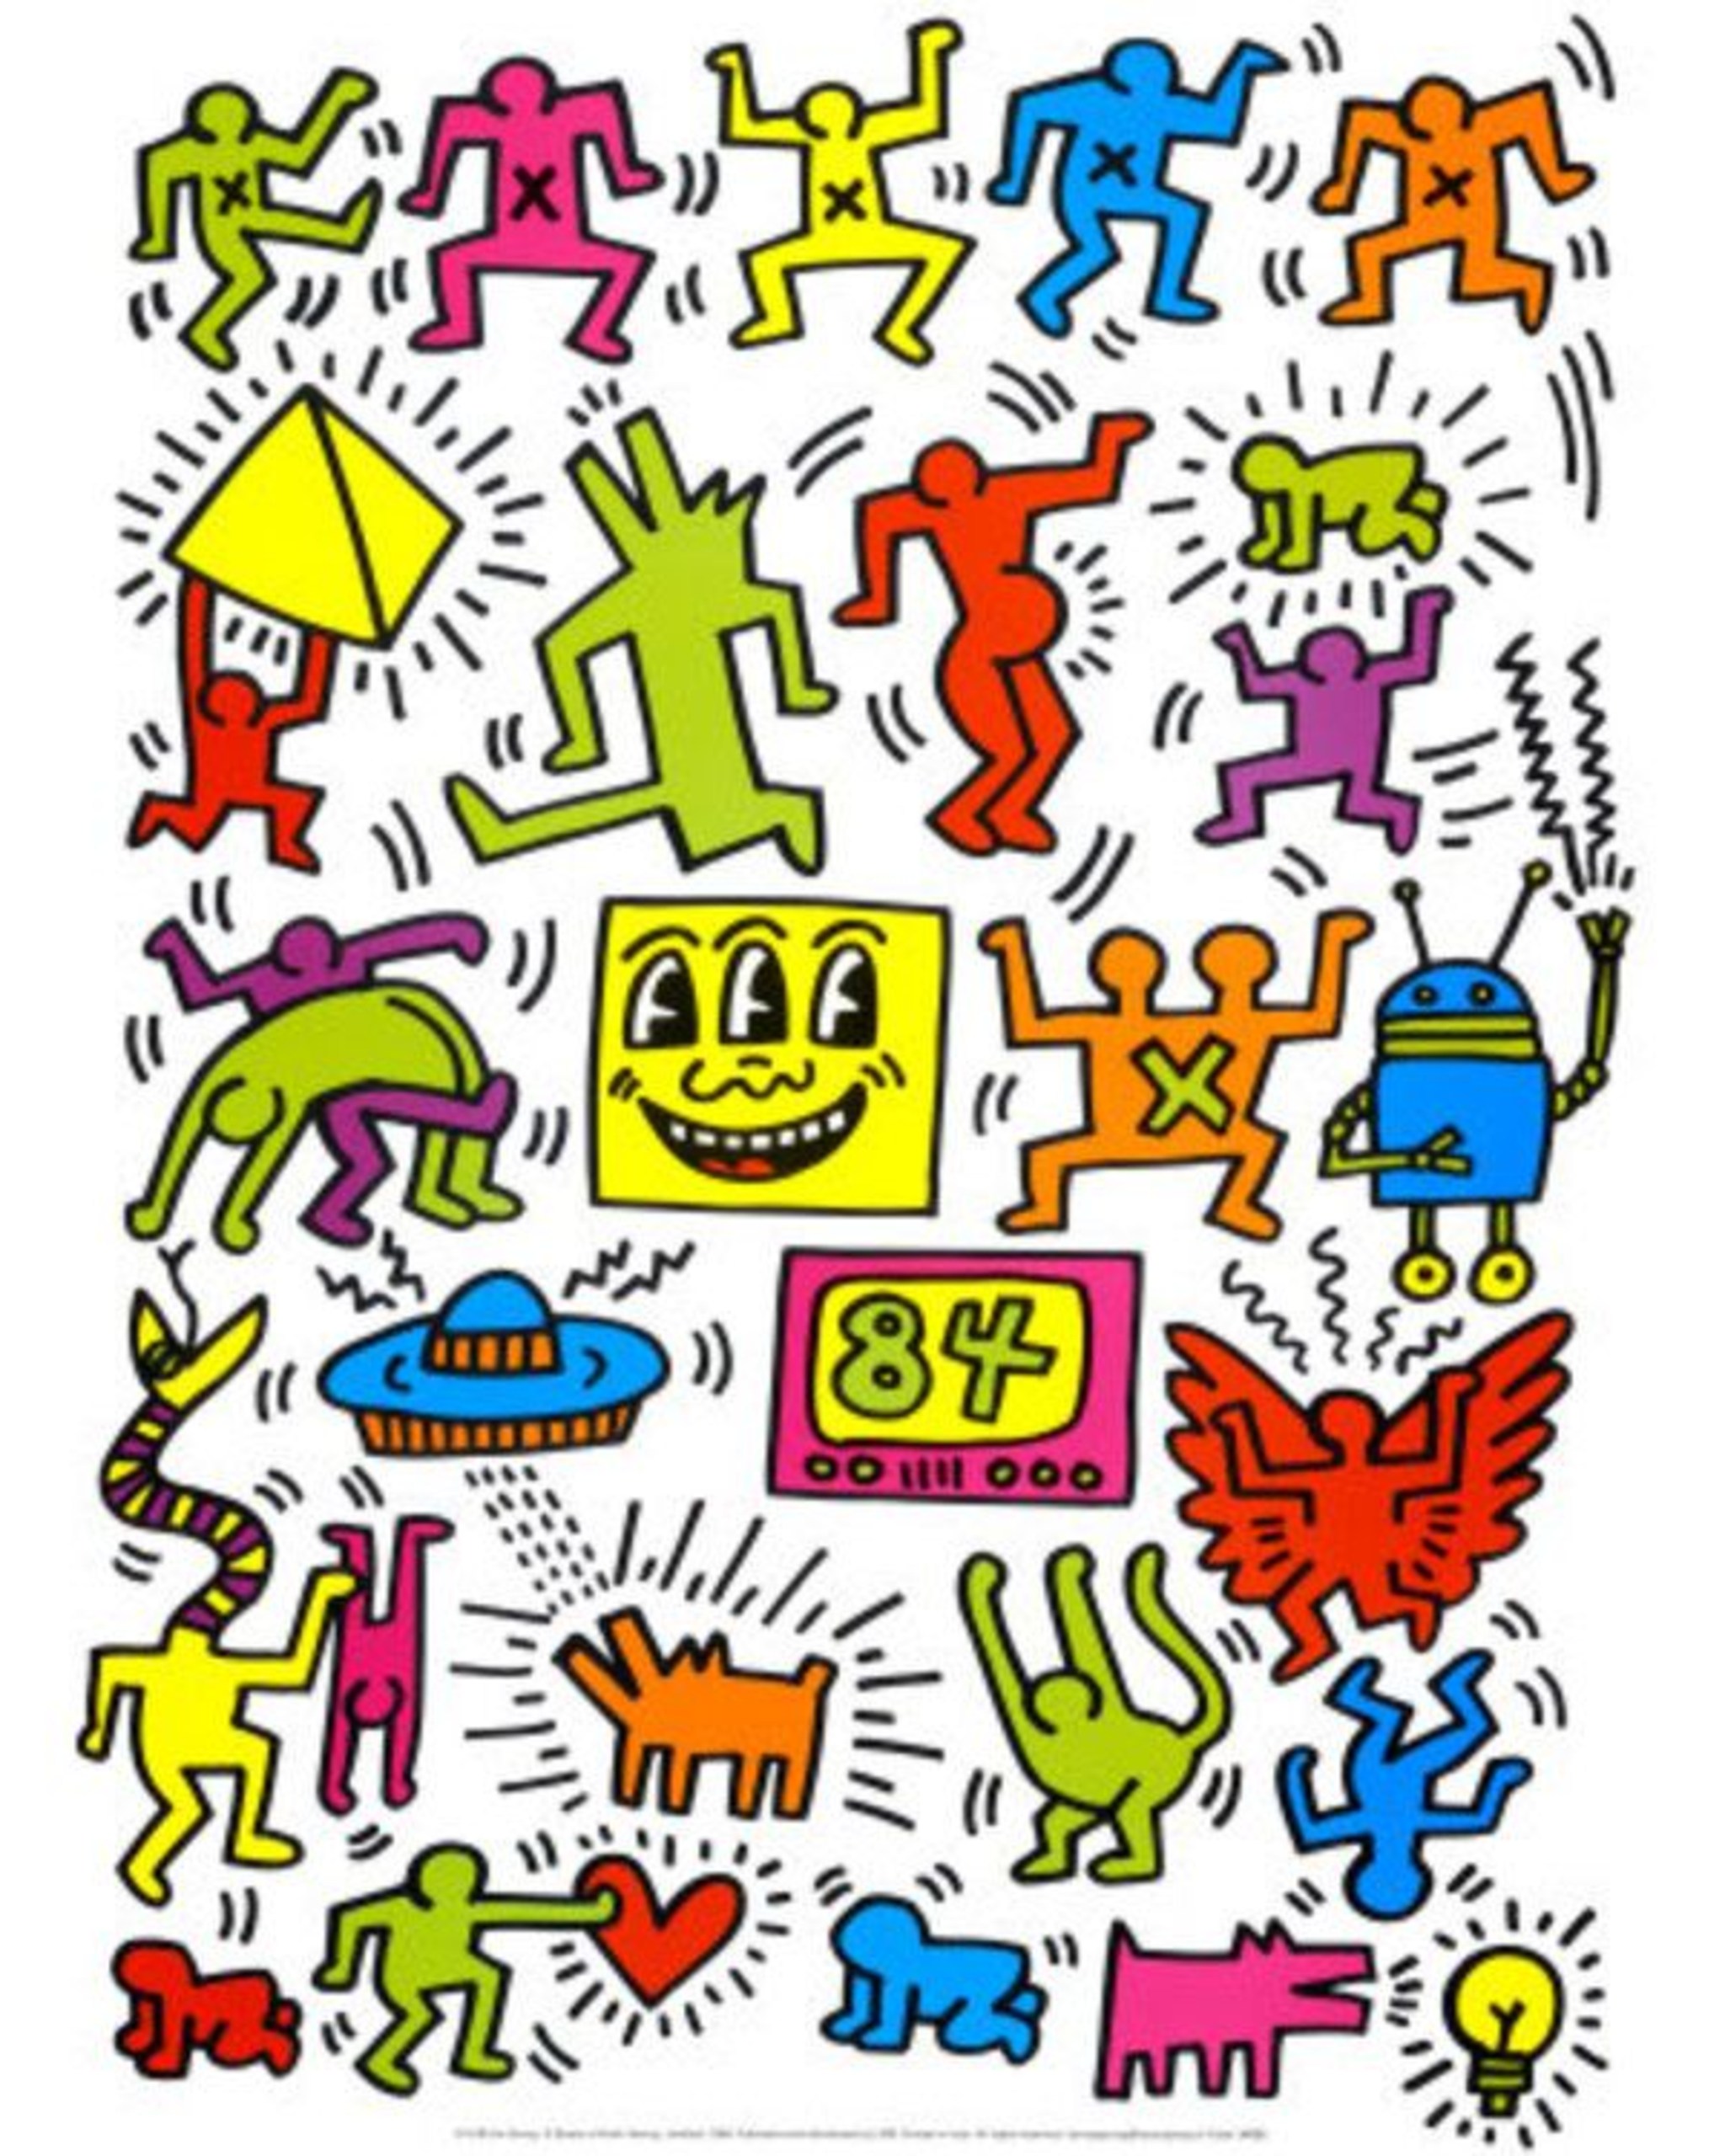 Mobiles Qhd - Keith Haring Art Iphone Background , HD Wallpaper & Backgrounds